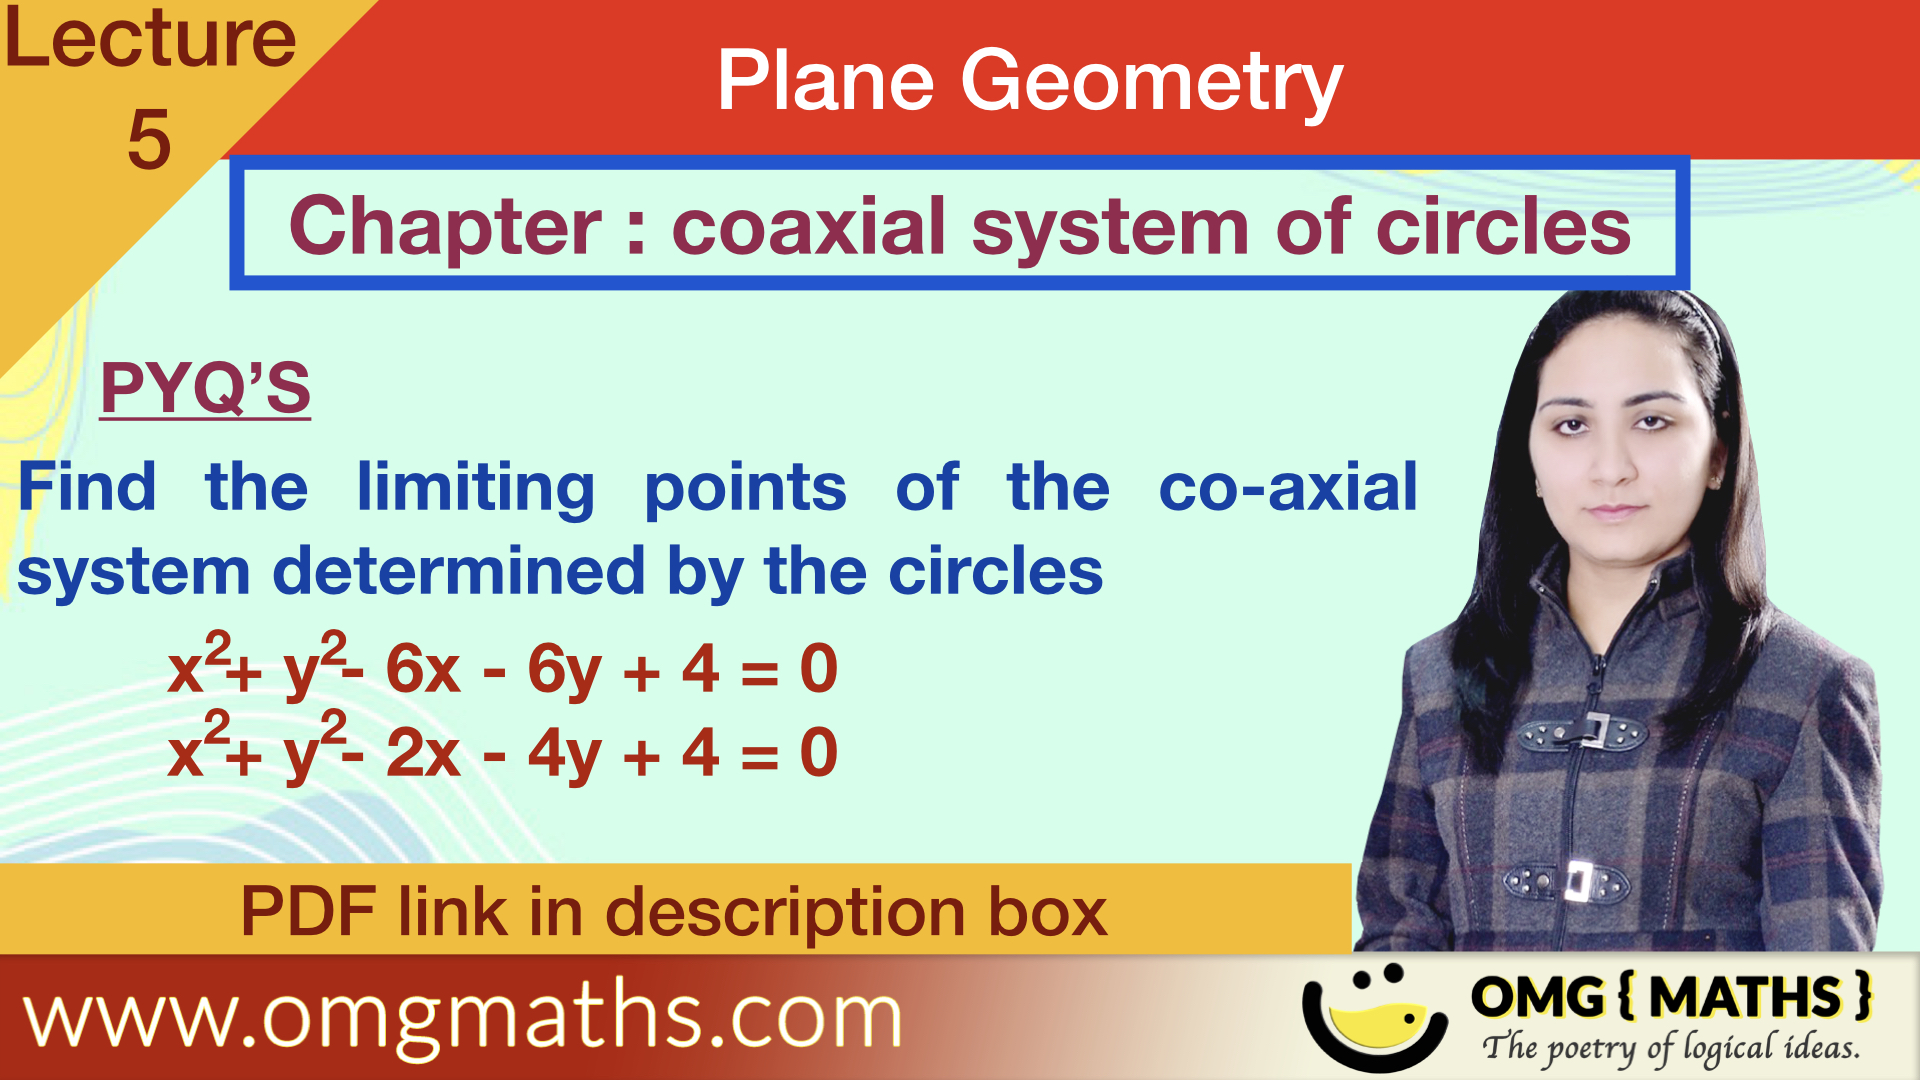 Coaxial system of circles| pyq 4 | Plane Geometry | bsc maths